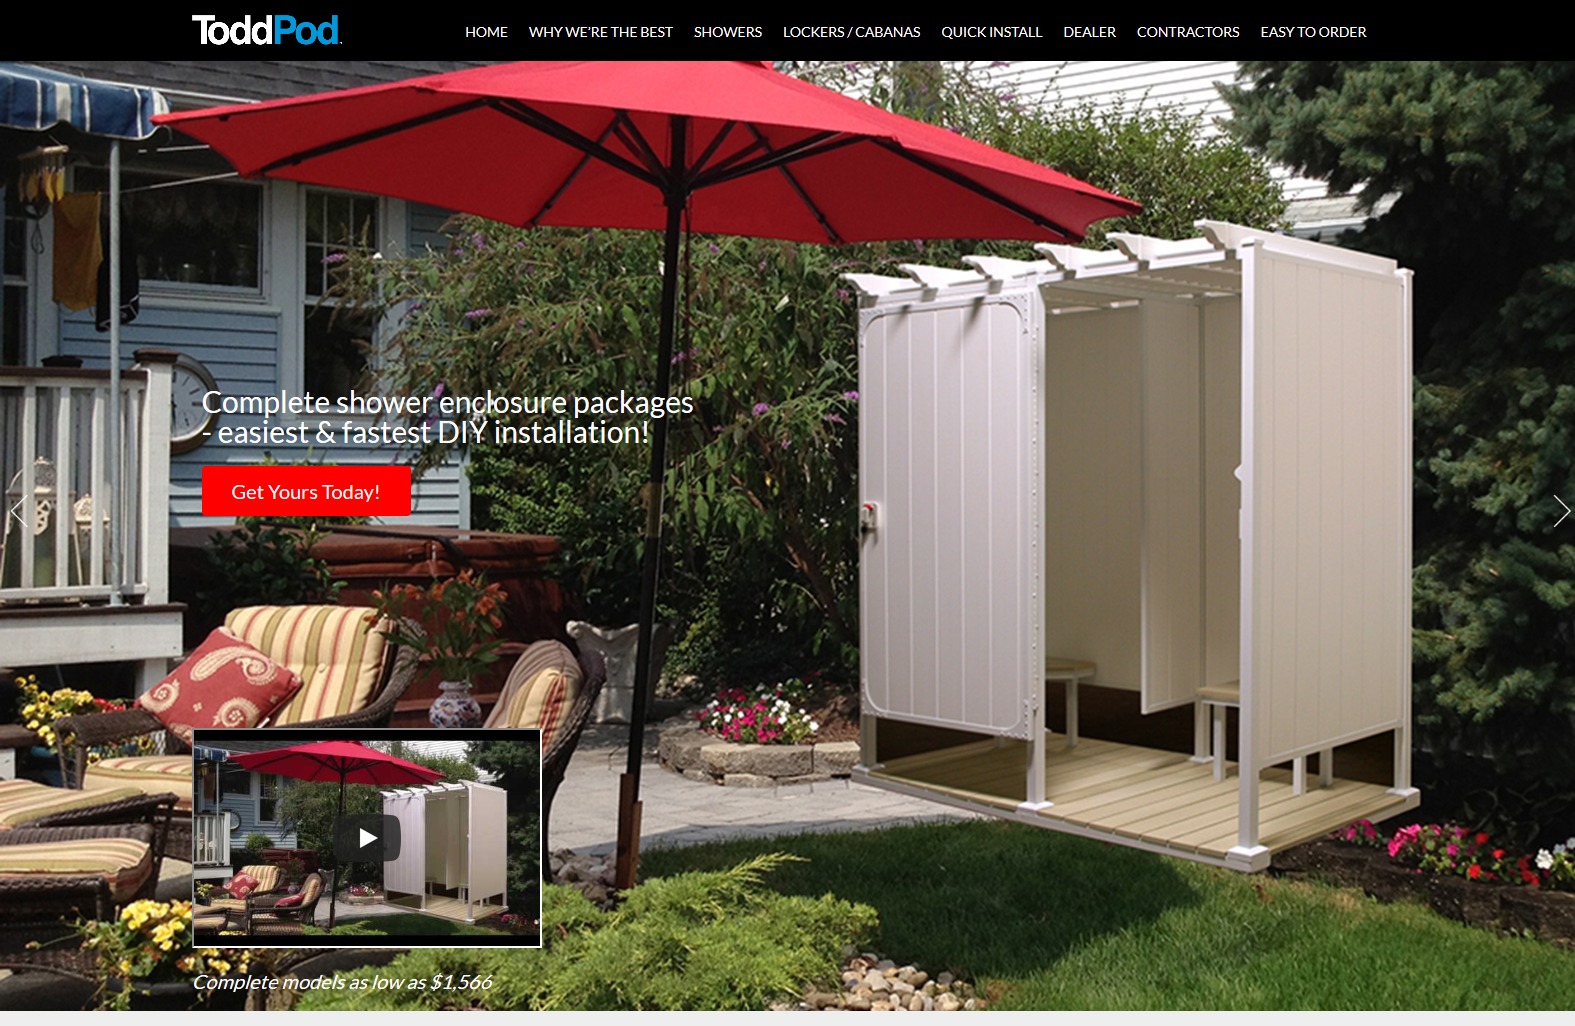 Toddpod Home Page